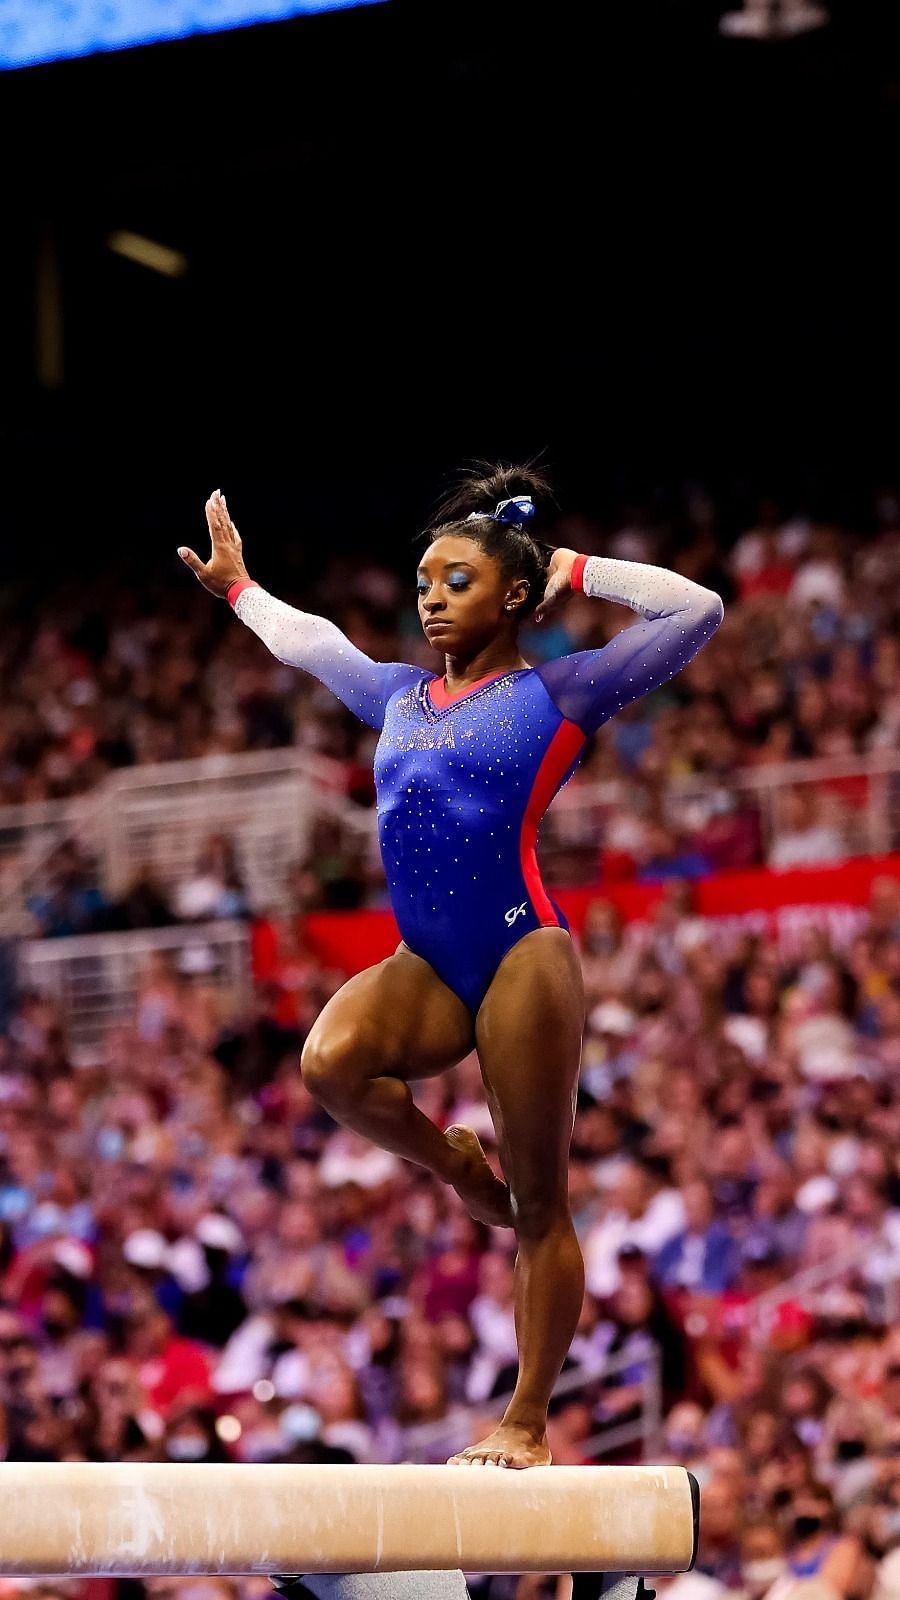 Us Olympic Gymnastics Trials 21 Results Simone Biles Hits Peak As Tokyo Comes In Focus At Trials